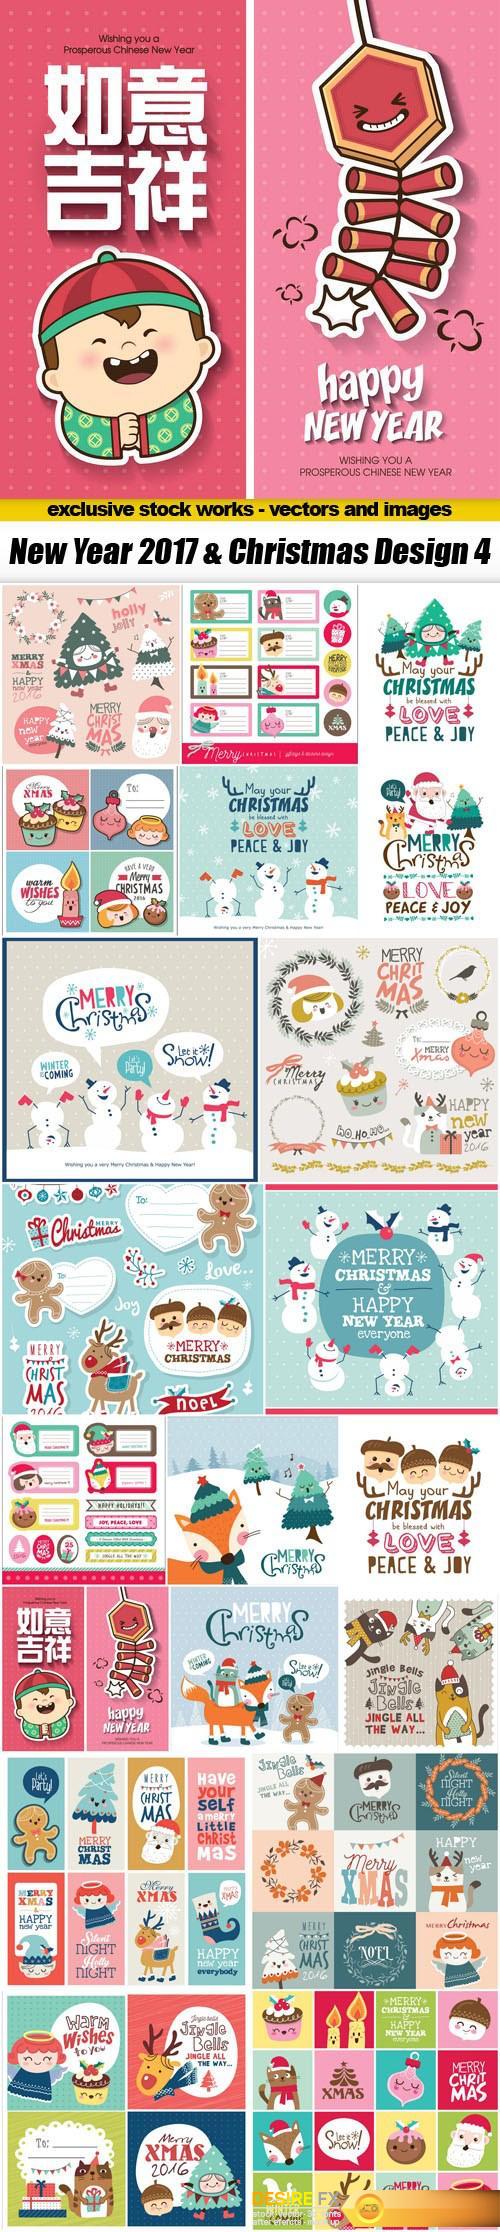 New Year 2017 & Christmas Design 4 - 20xEPS